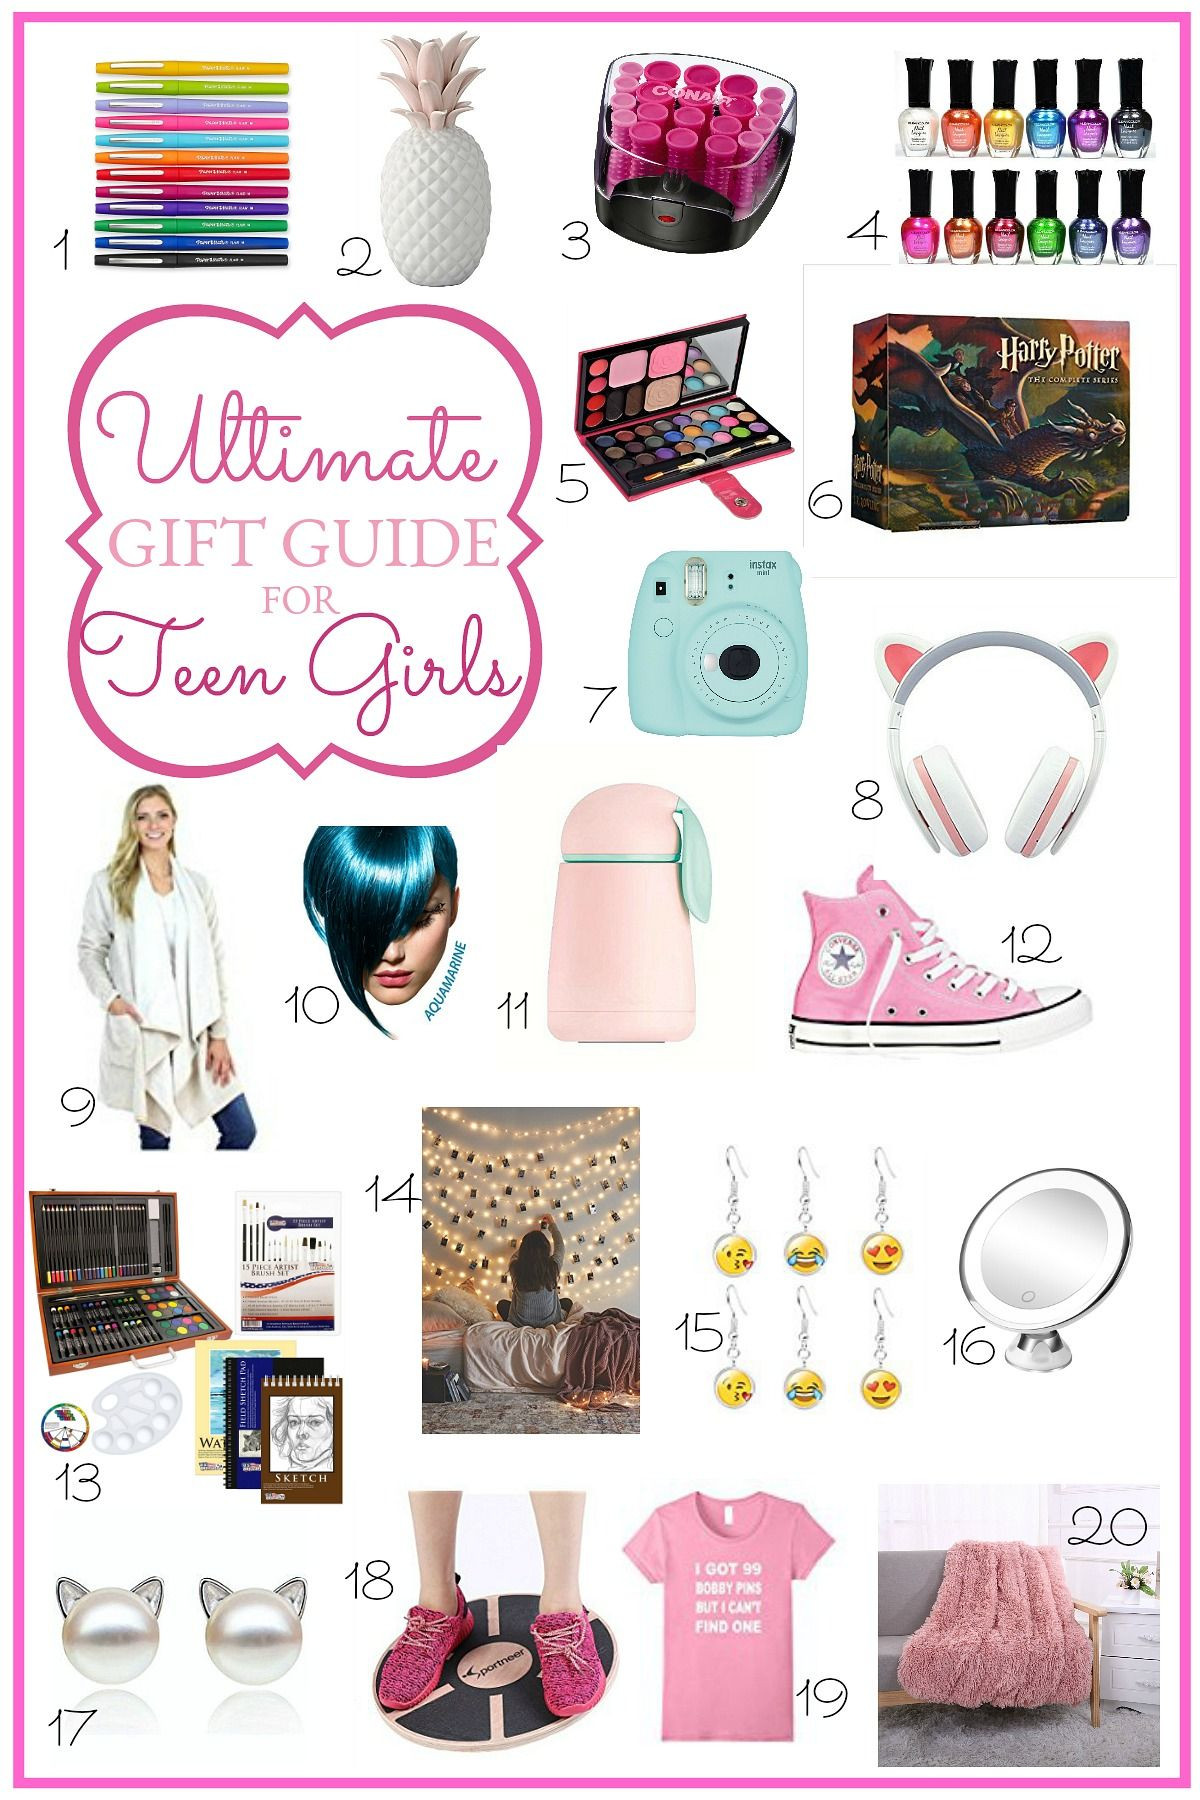 20 Ideas for Christmas Gift Ideas for Teenage Daughter – Home, Family